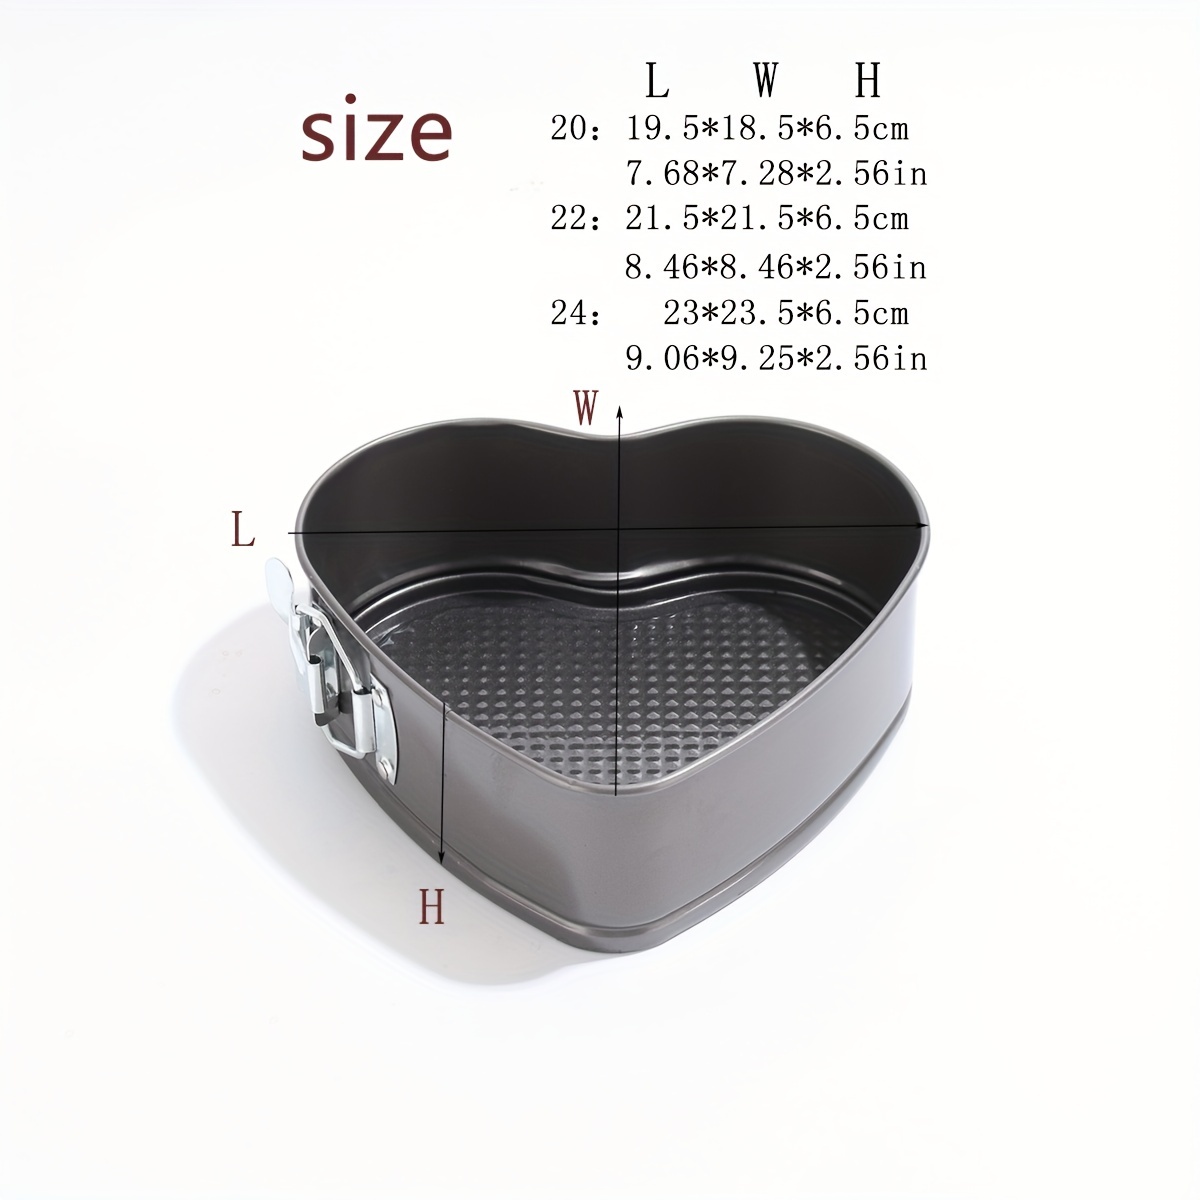 Heart, Round And Square Shaped Baking Pan/cake Tins/mould - 3